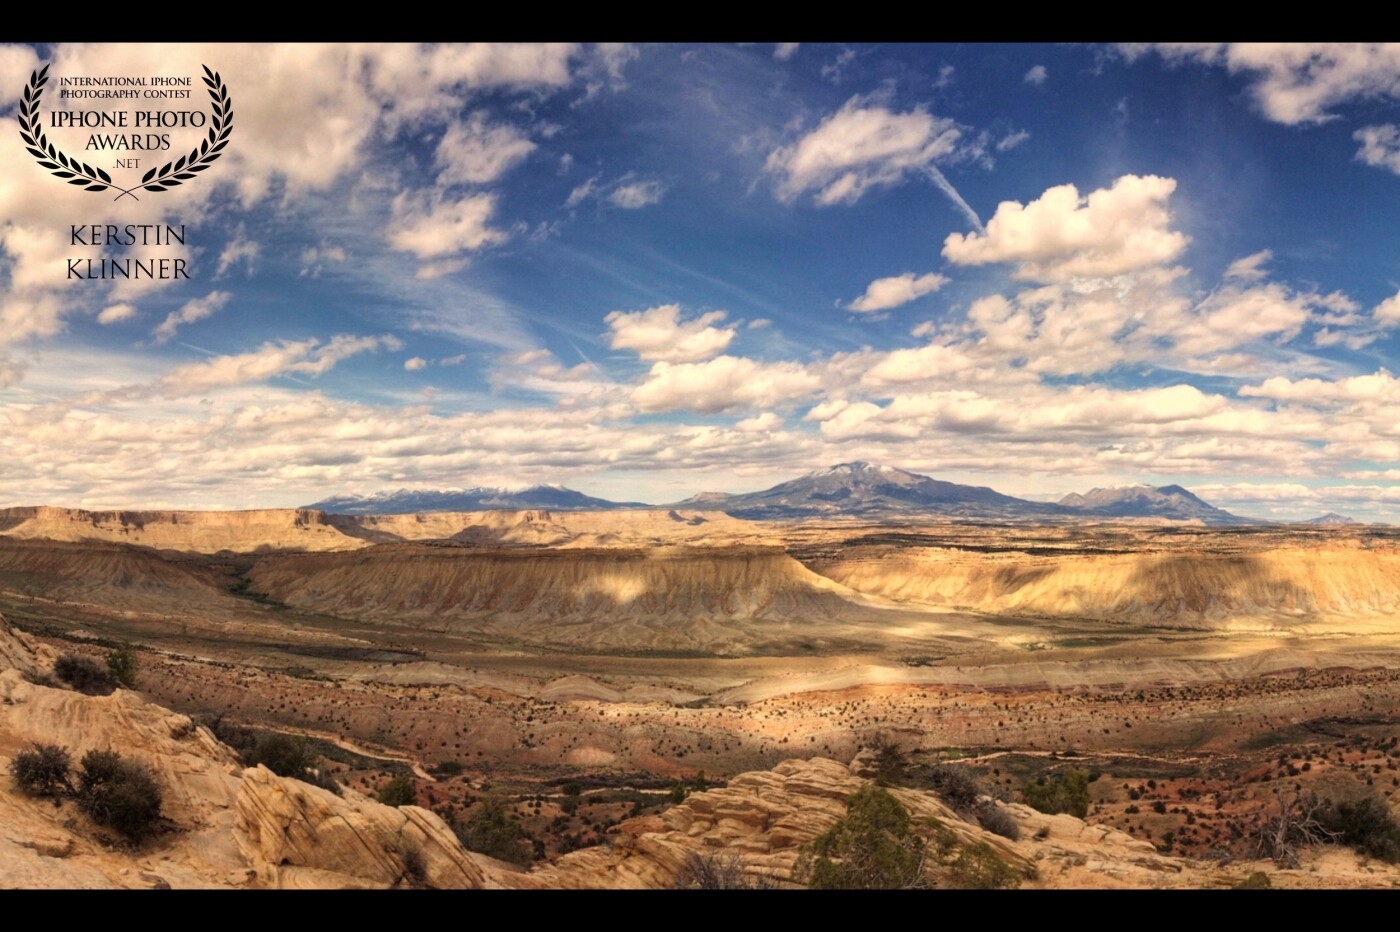 The view of the "Waterpocket Fold", an over 100-mile long earth fold, is one of my most impressive travel experiences. I enjoyed this view from the Strike Valley Overlook.